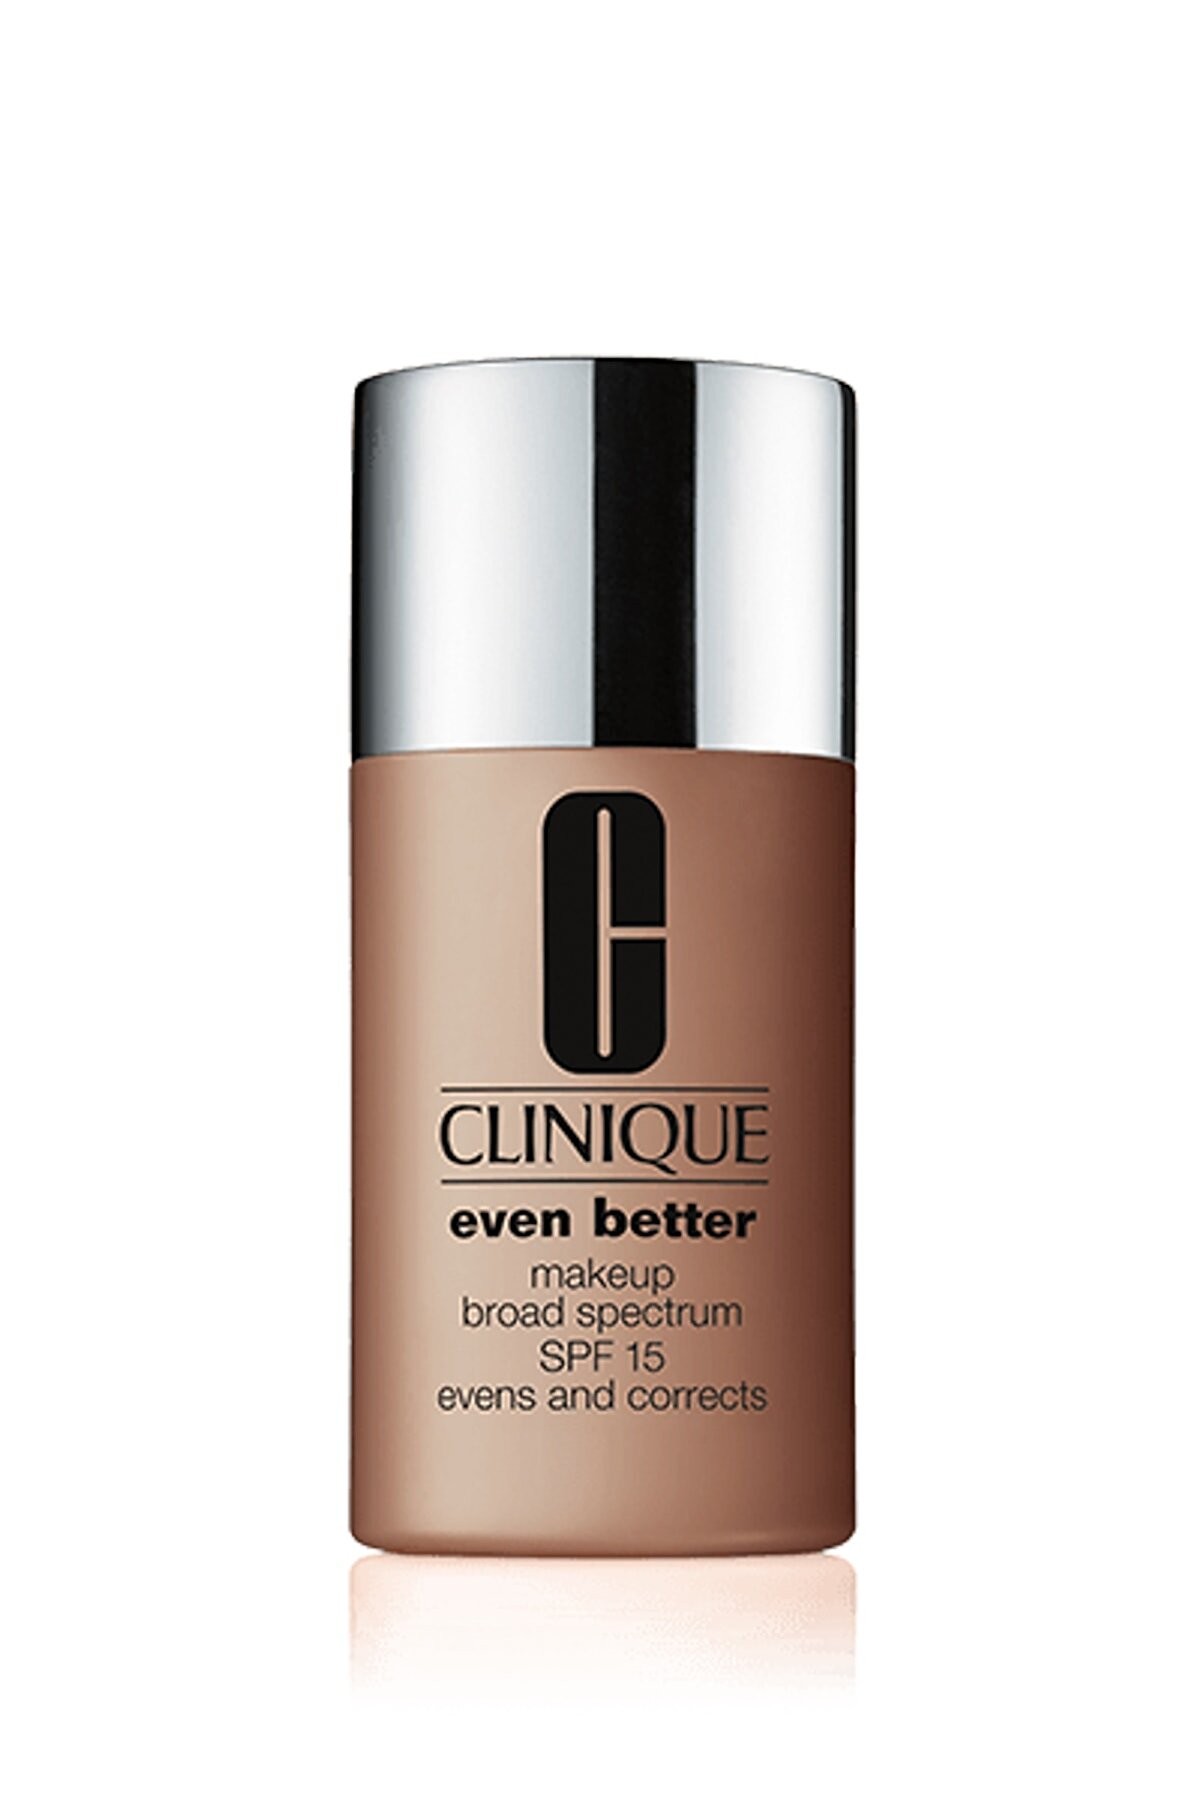 Clinique Even Better Make-Up Spf 15 Biscuit -30 ml